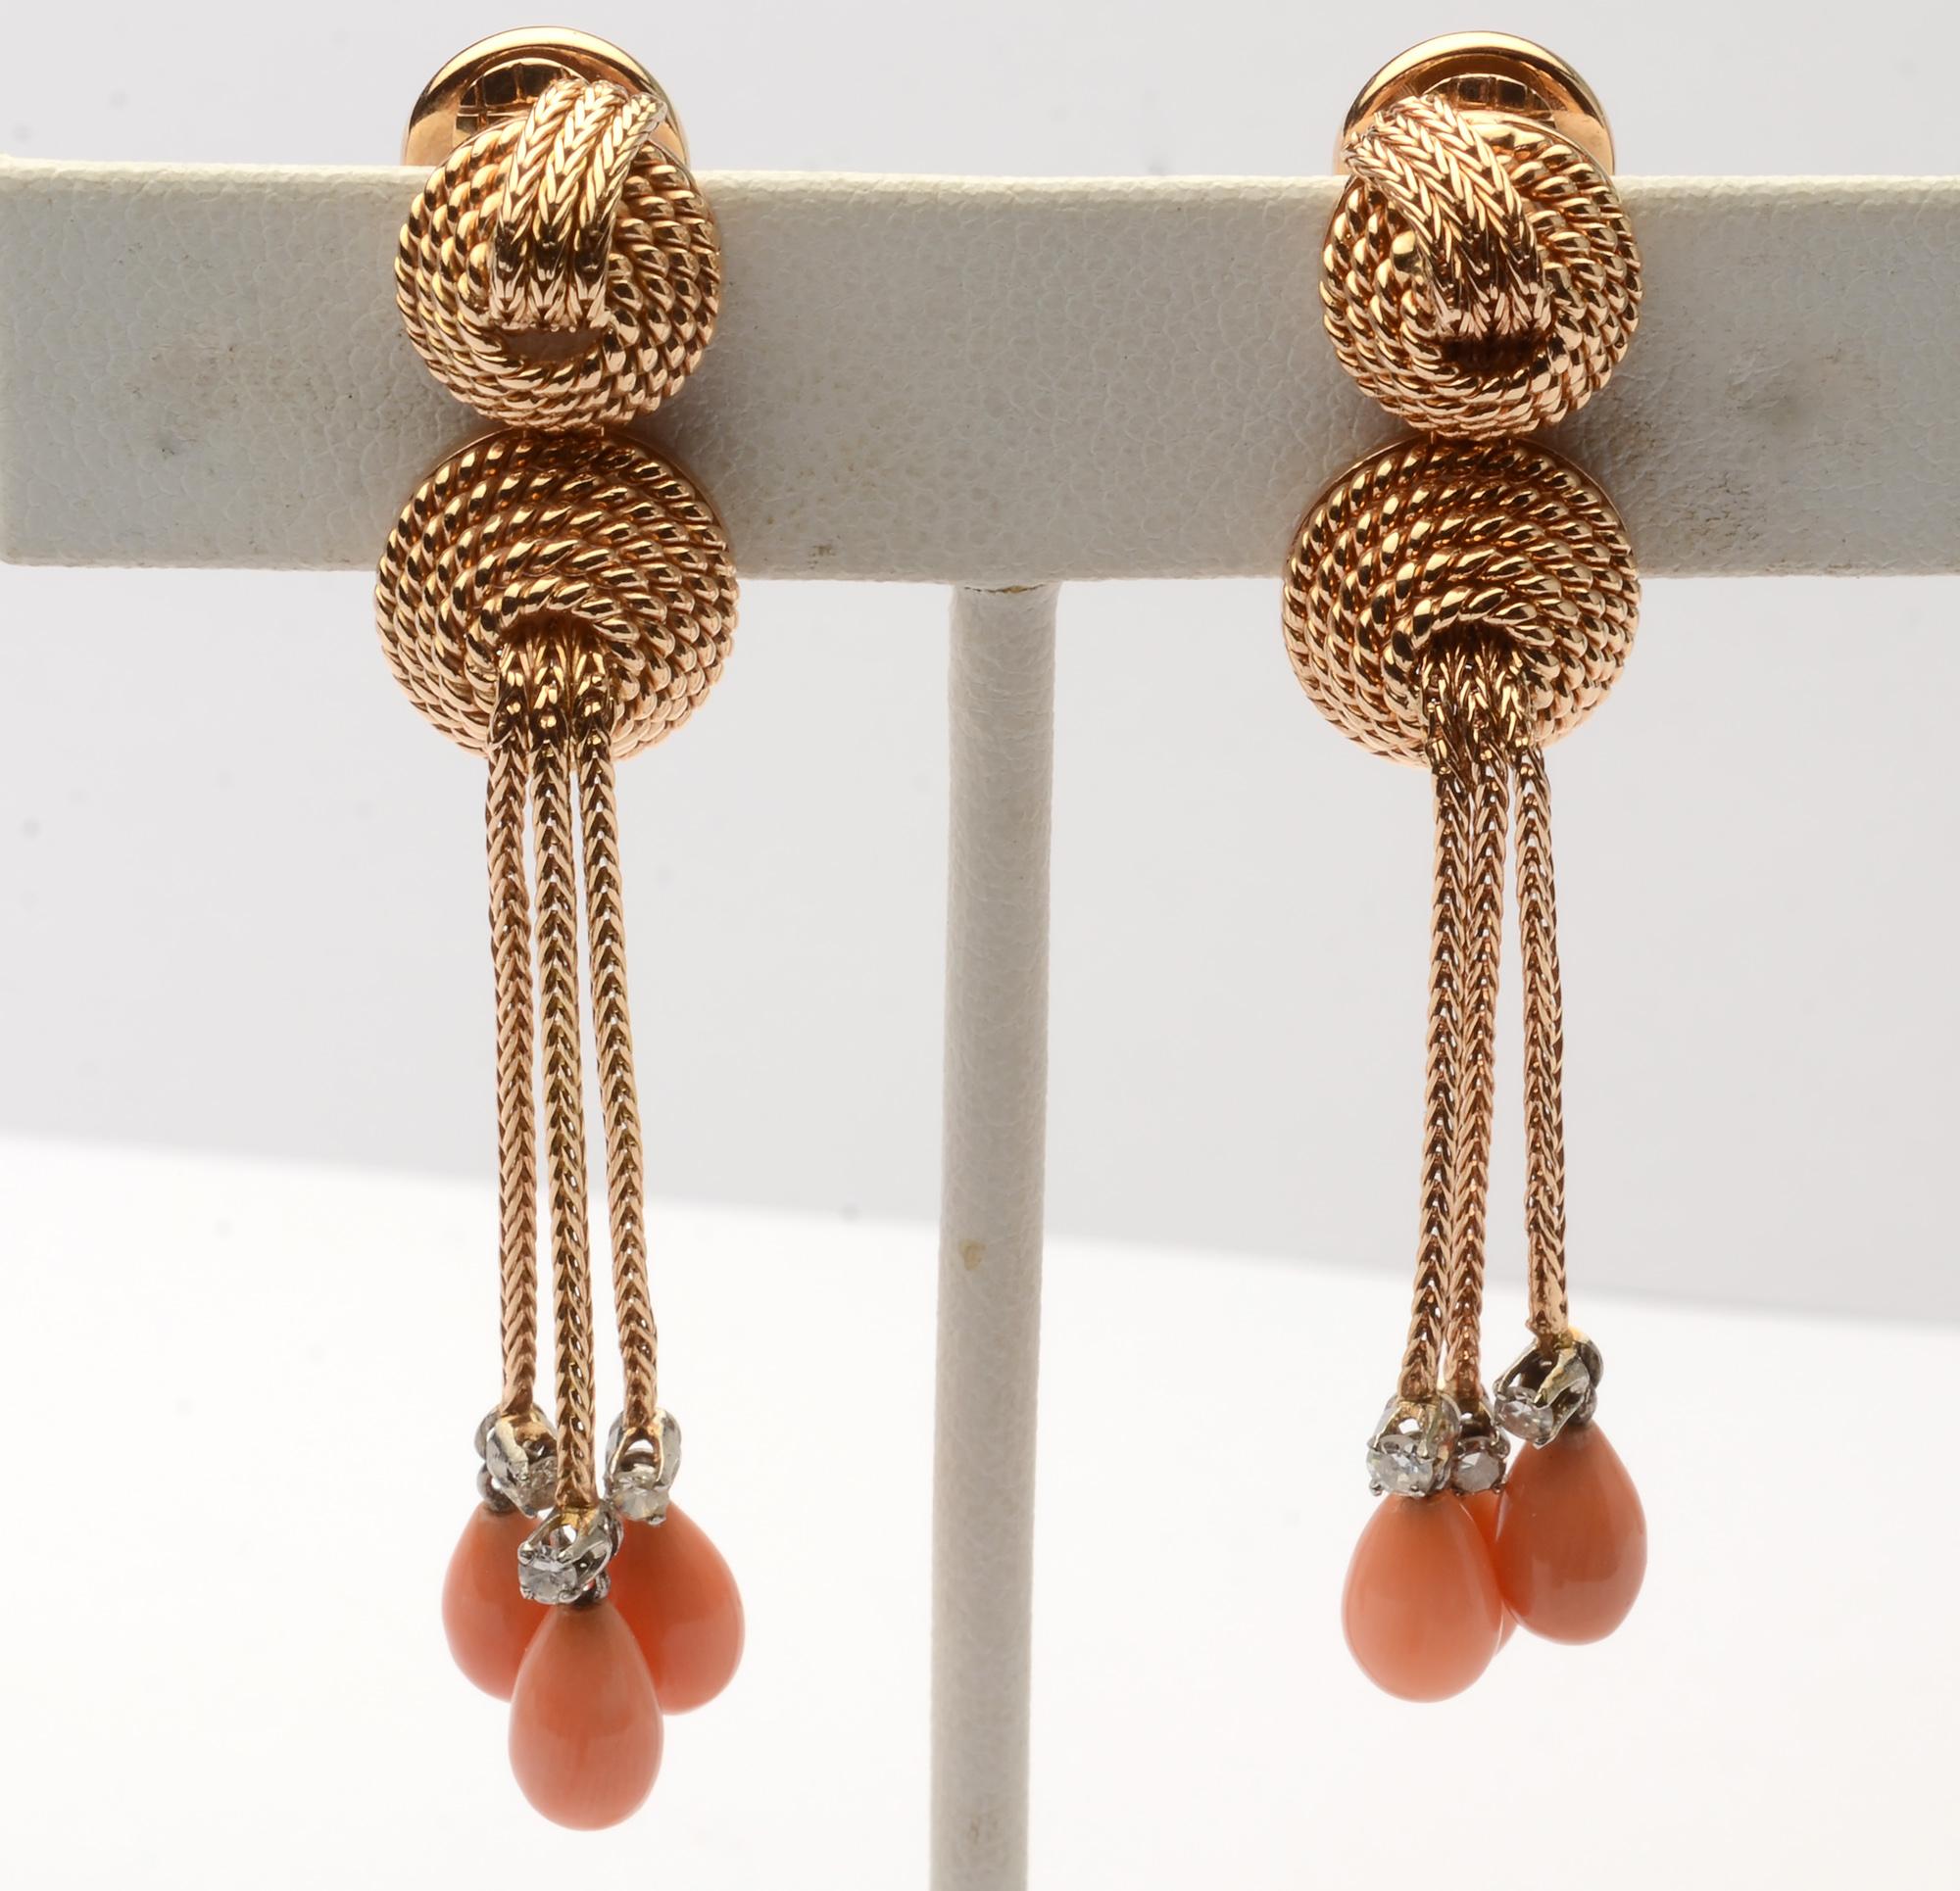 Unusual coral and diamond earring with a variety of textures and dimensions. The two domes are twisted gold with foxtail over the top to  give the appearance of being a continuation of the three foxtail dangles. The pear shaped coral stones are